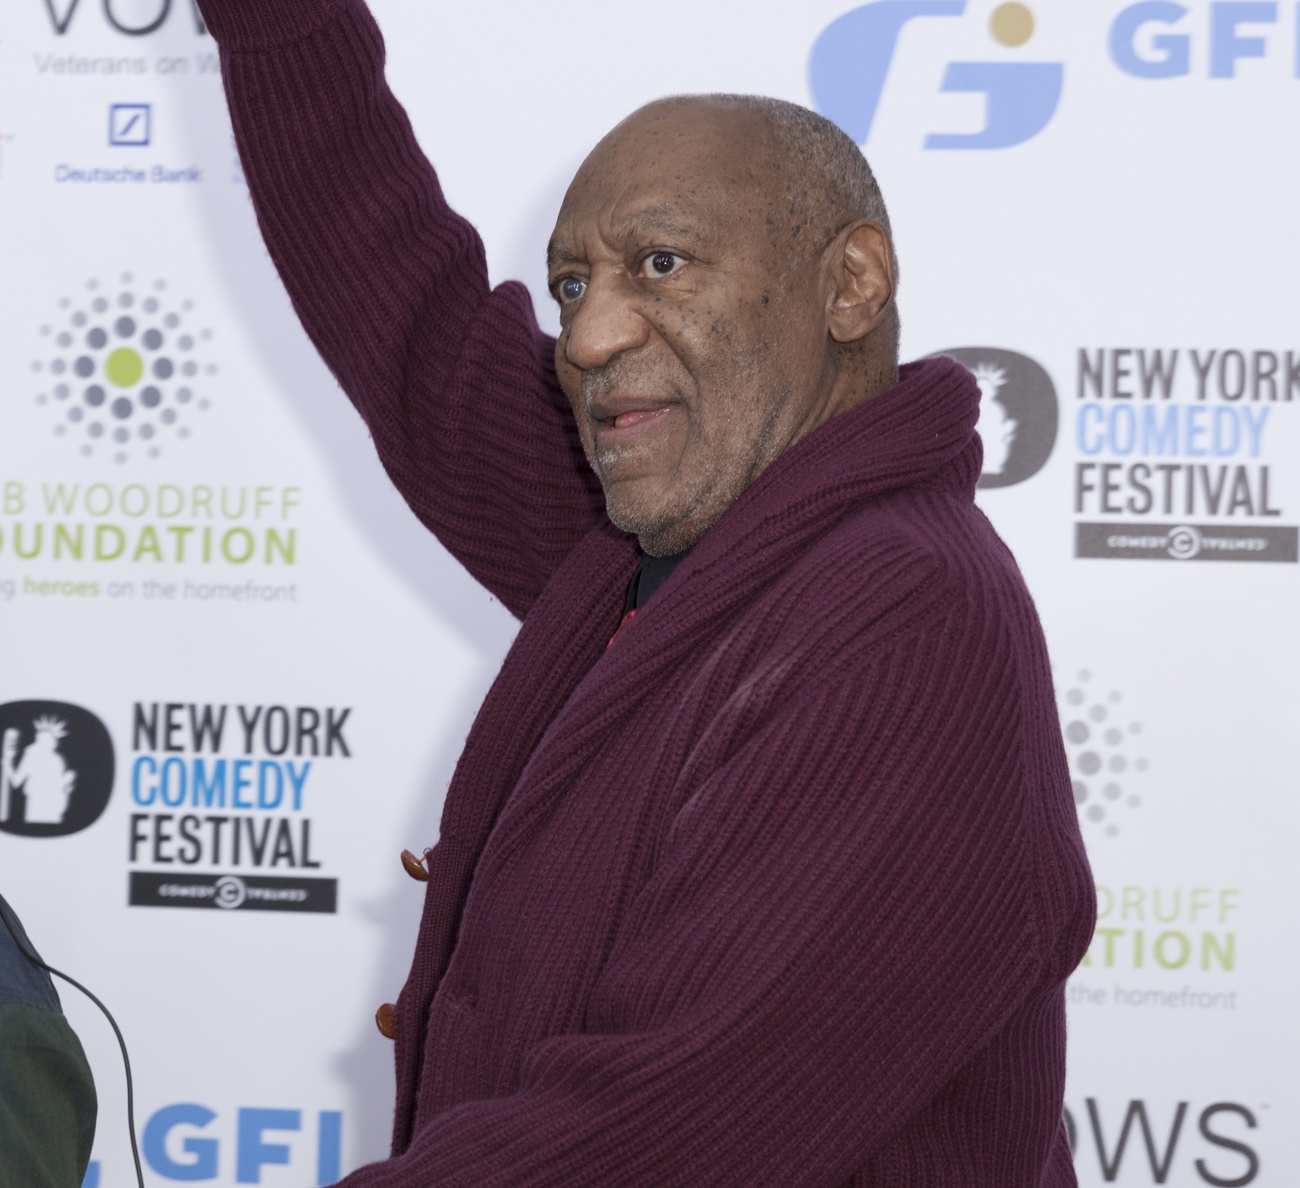 Model accuses Bill Cosby of drugging and assaulting her in 1969: new controversy for comedian